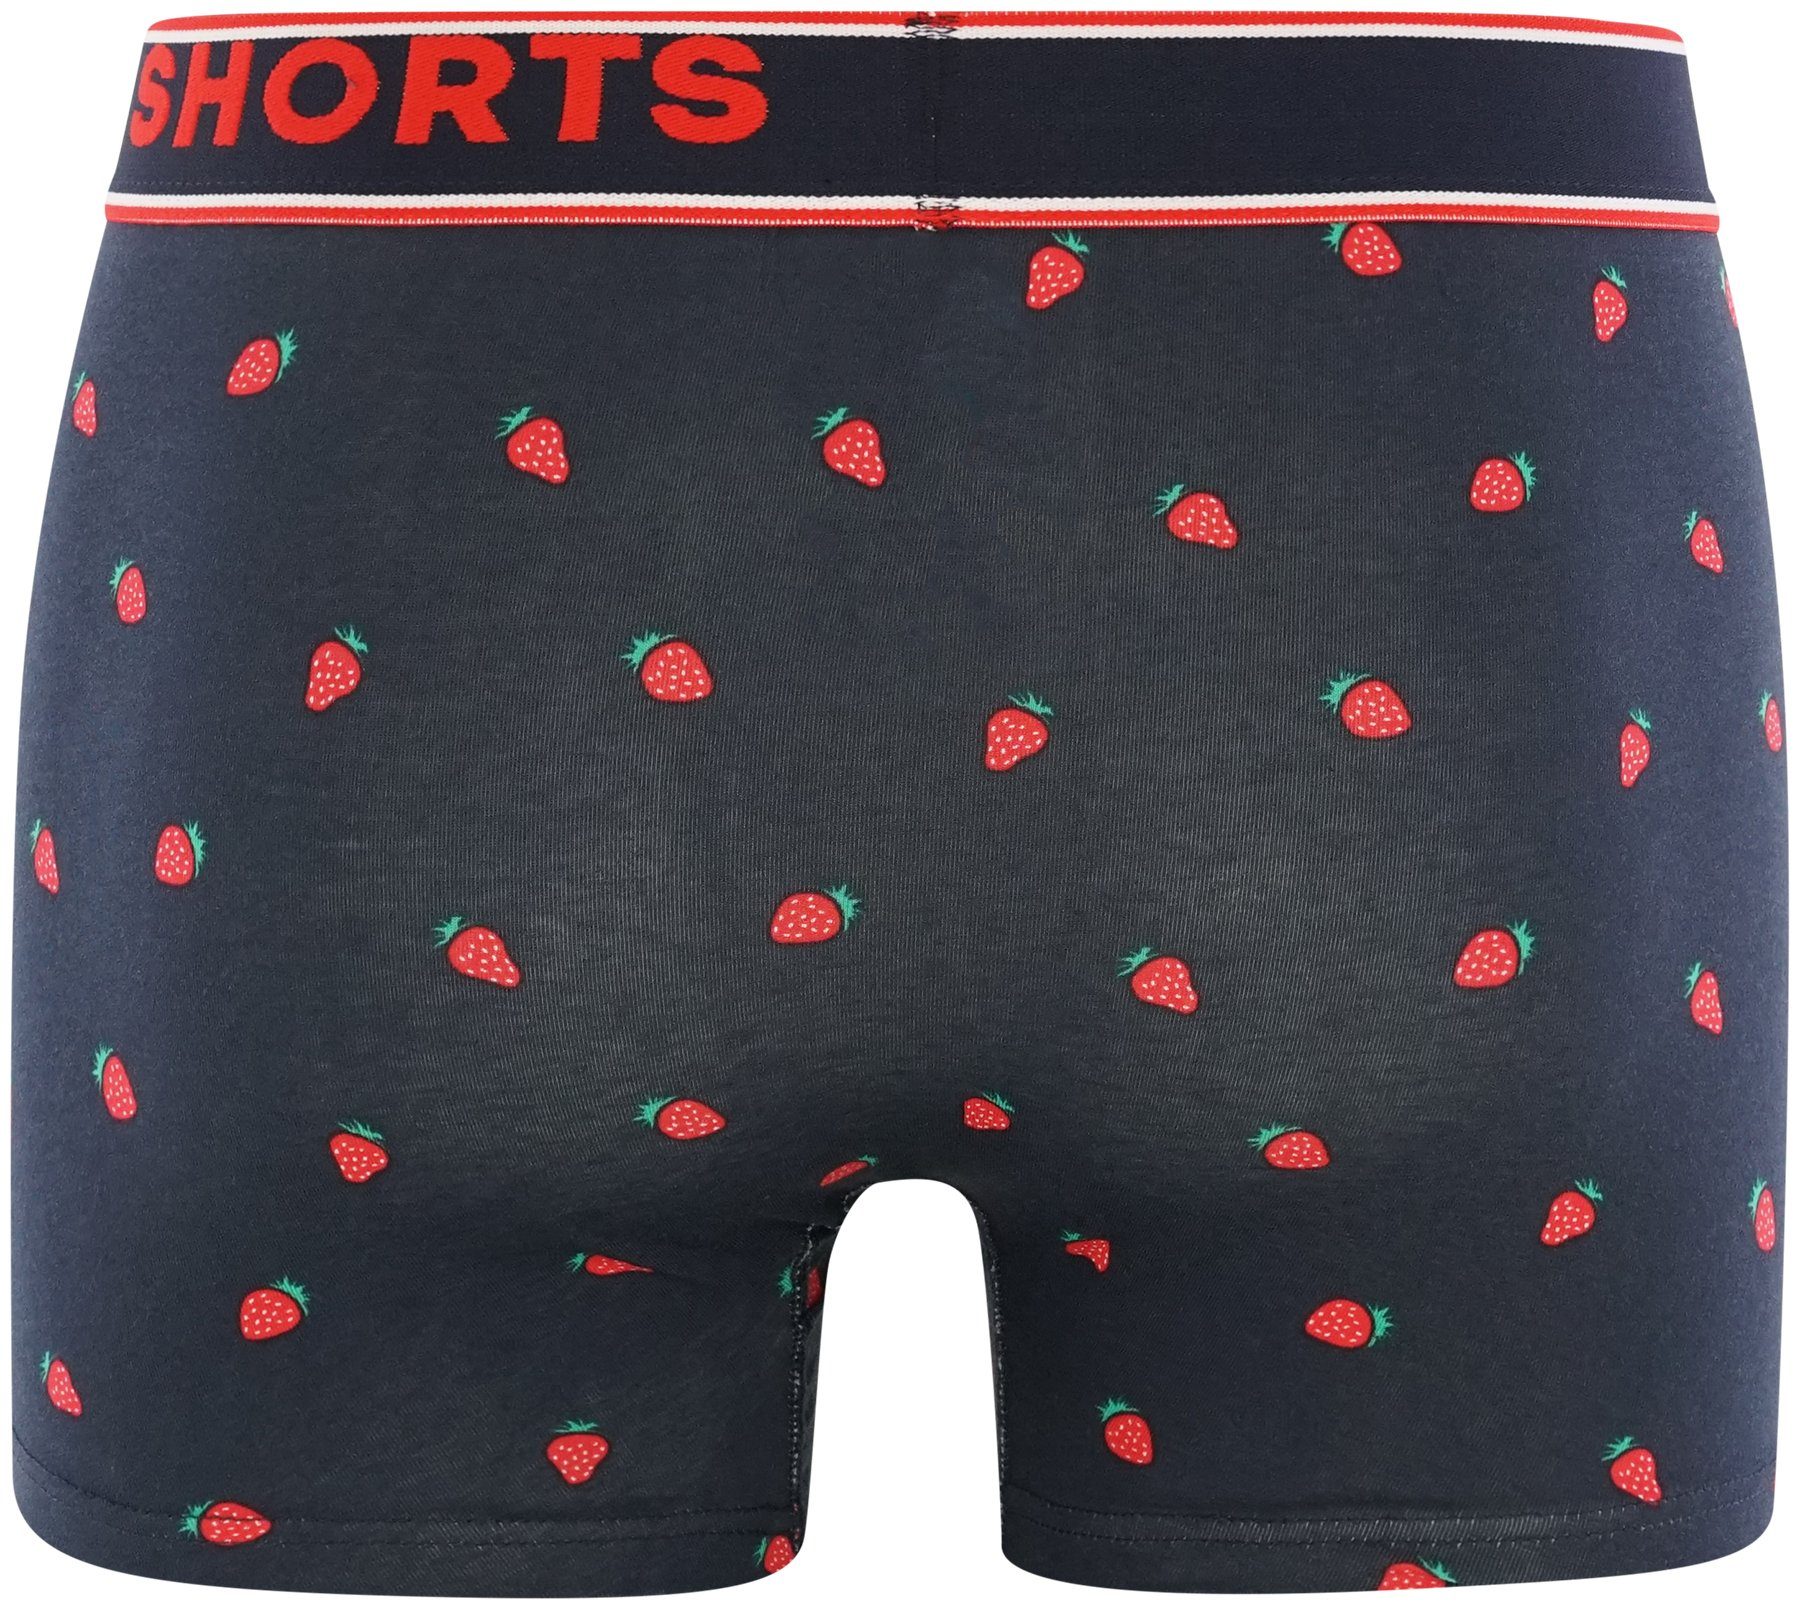 HAPPY SHORTS Retro Pants 2-Pack and Trunks Stripe Strawberries (2-St)